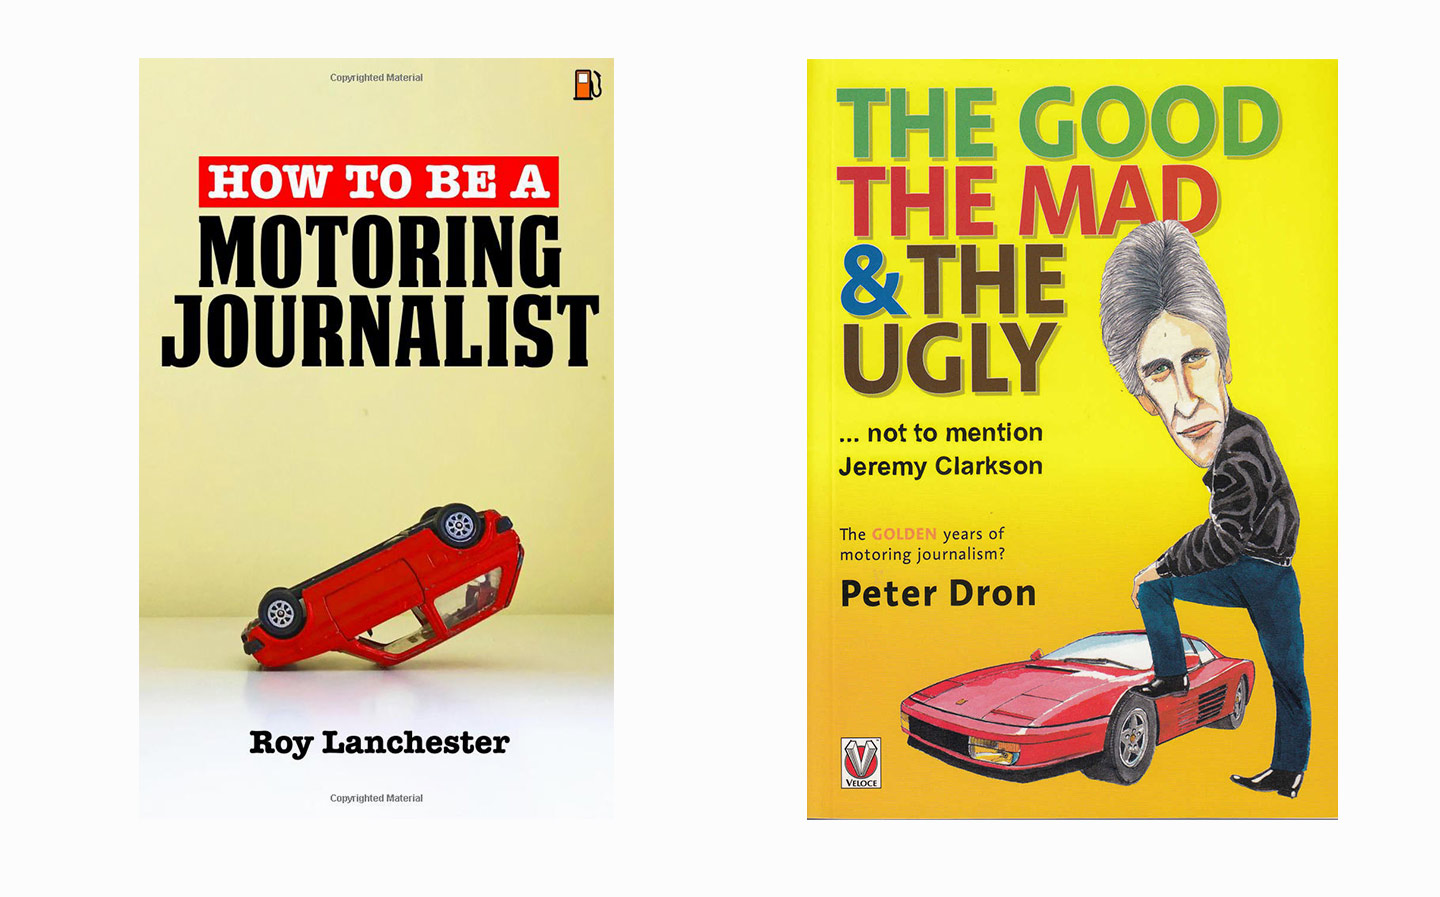 Two new motoring journalist memoirs are perfectly hilarious